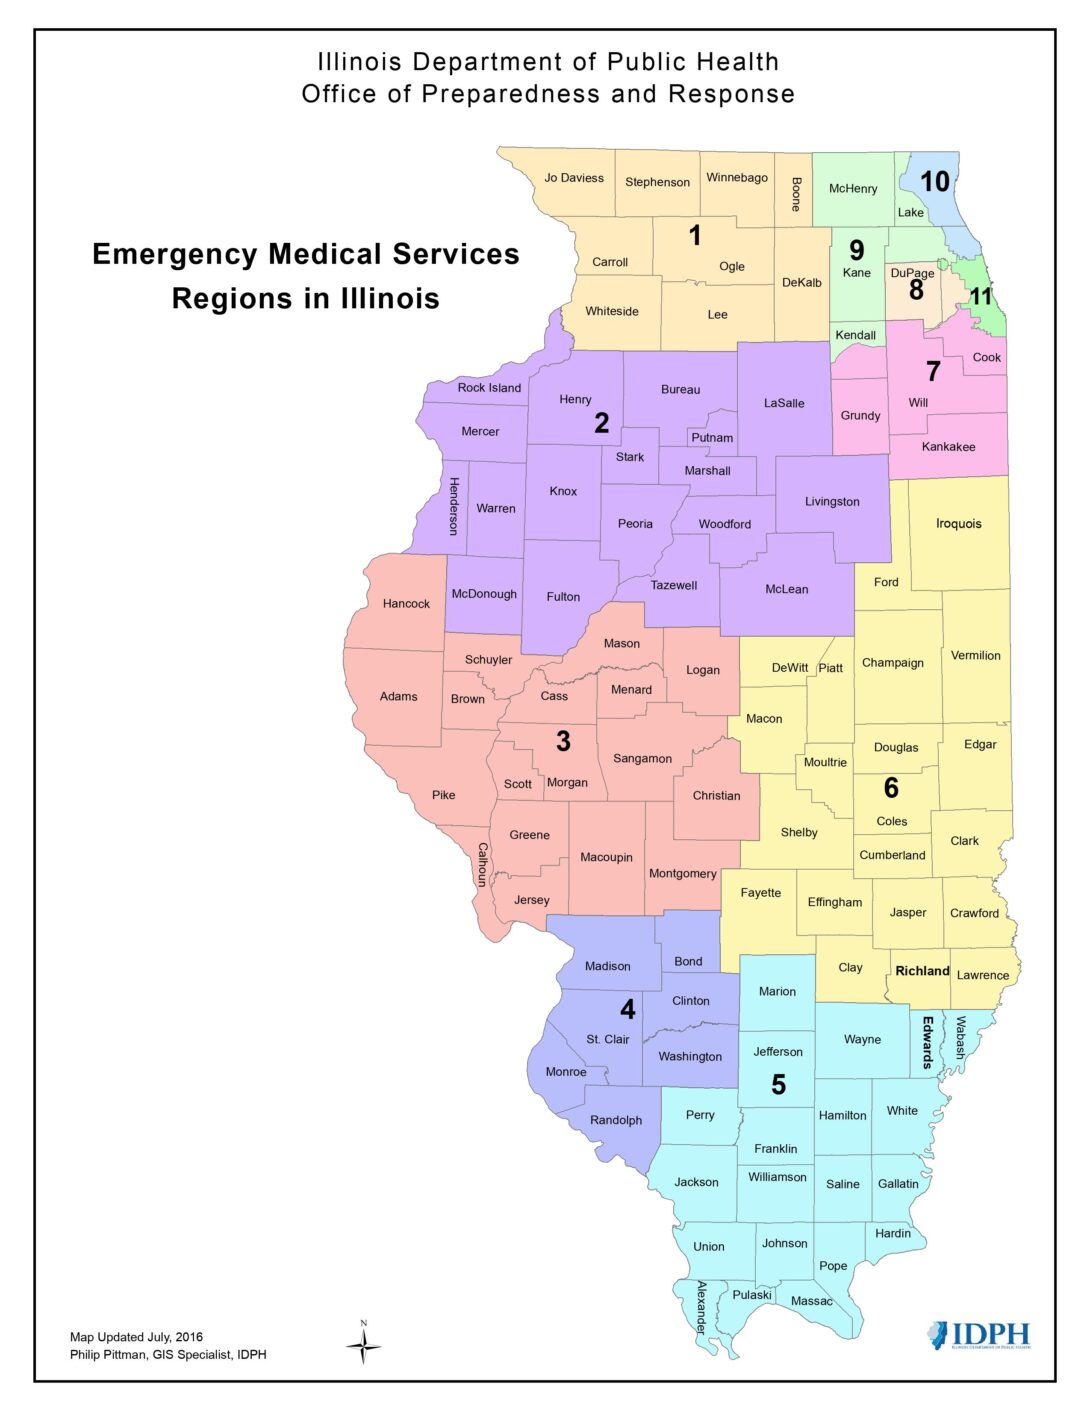 Illinois Department of Public Health Map of the 11 Emergency Medical Services